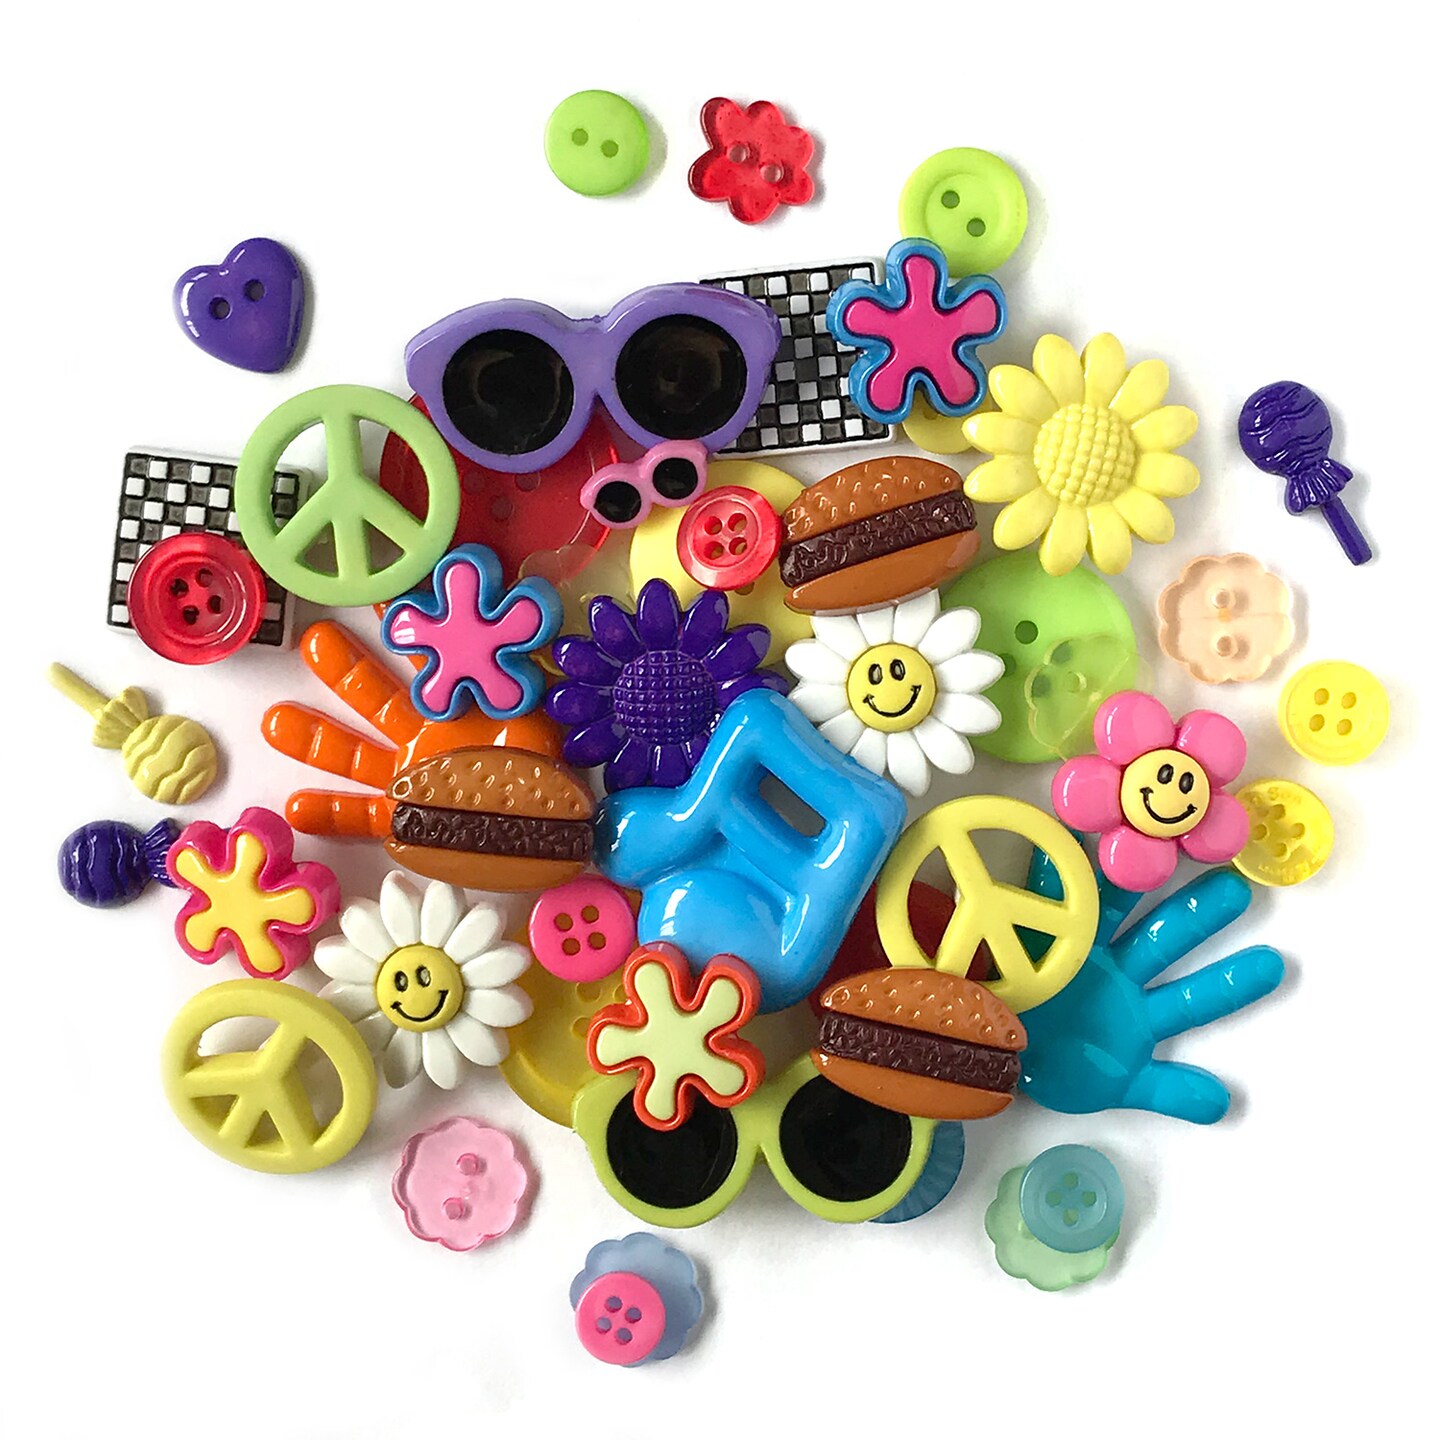 Buttons Galore 50+ Buttons for Sewing & Crafts - Sewing